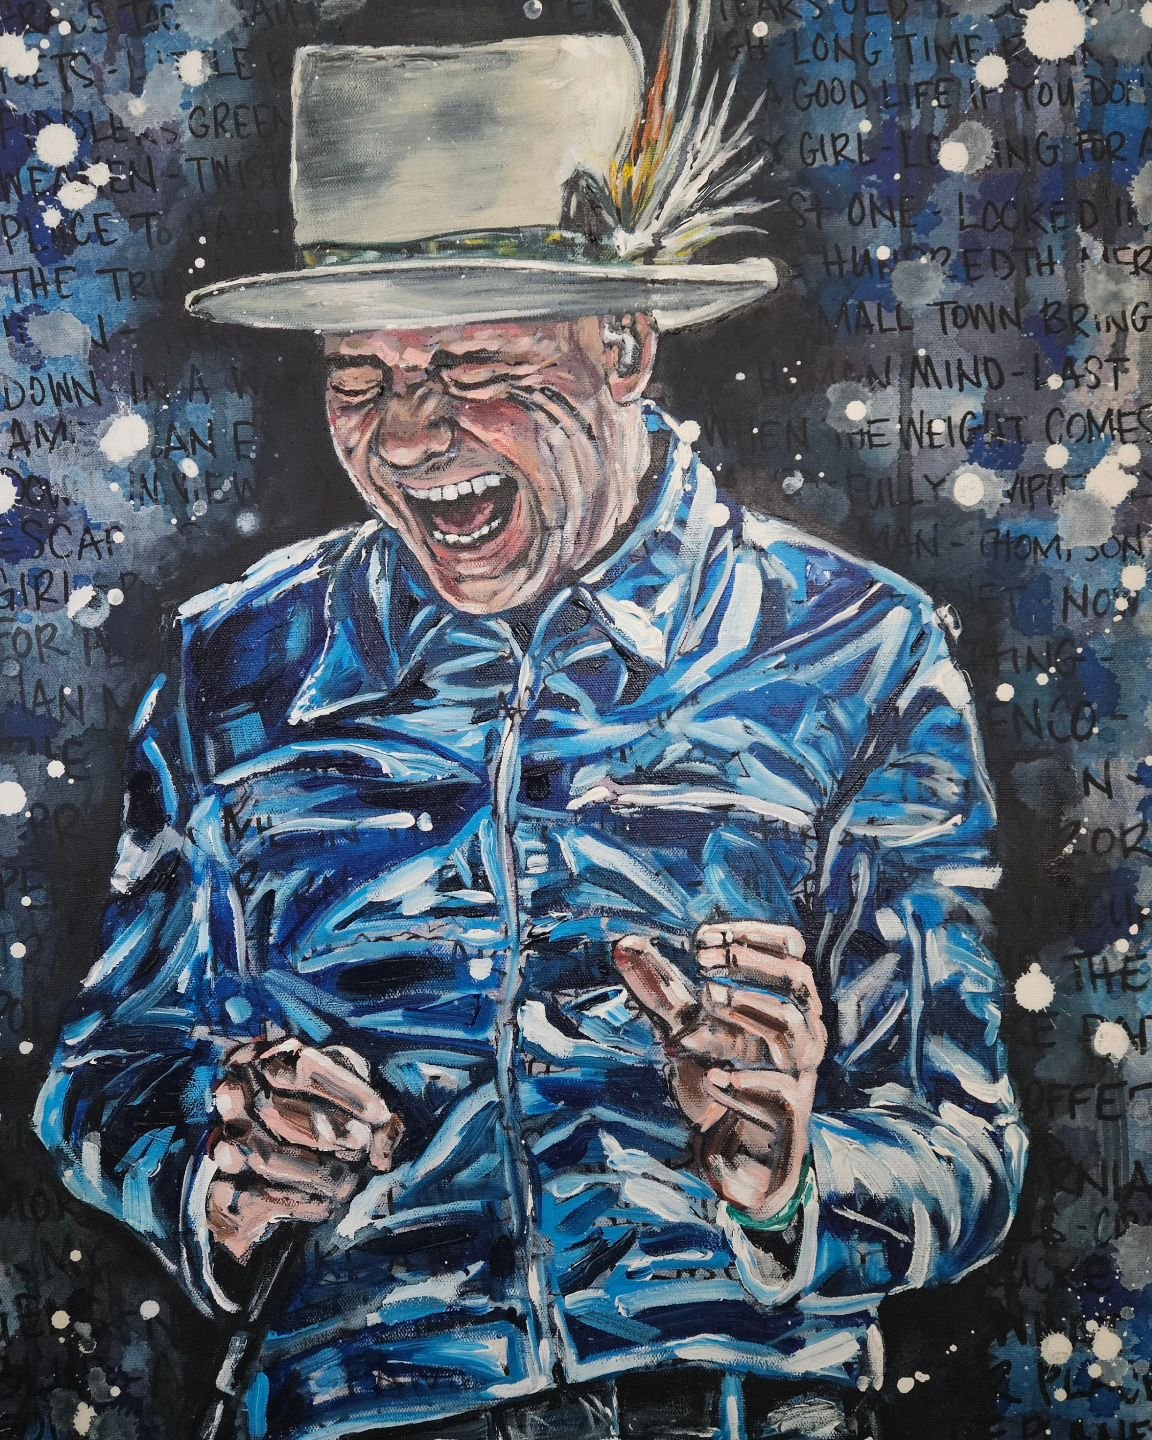 GORD

18x24

Some paintings just kinda hit you different when you're painting them....this was definitely one of those paintings.

One of my collectors commissioned me to paint Gord Downie, as a gift to a friend of the Downie family. So honored &amp;